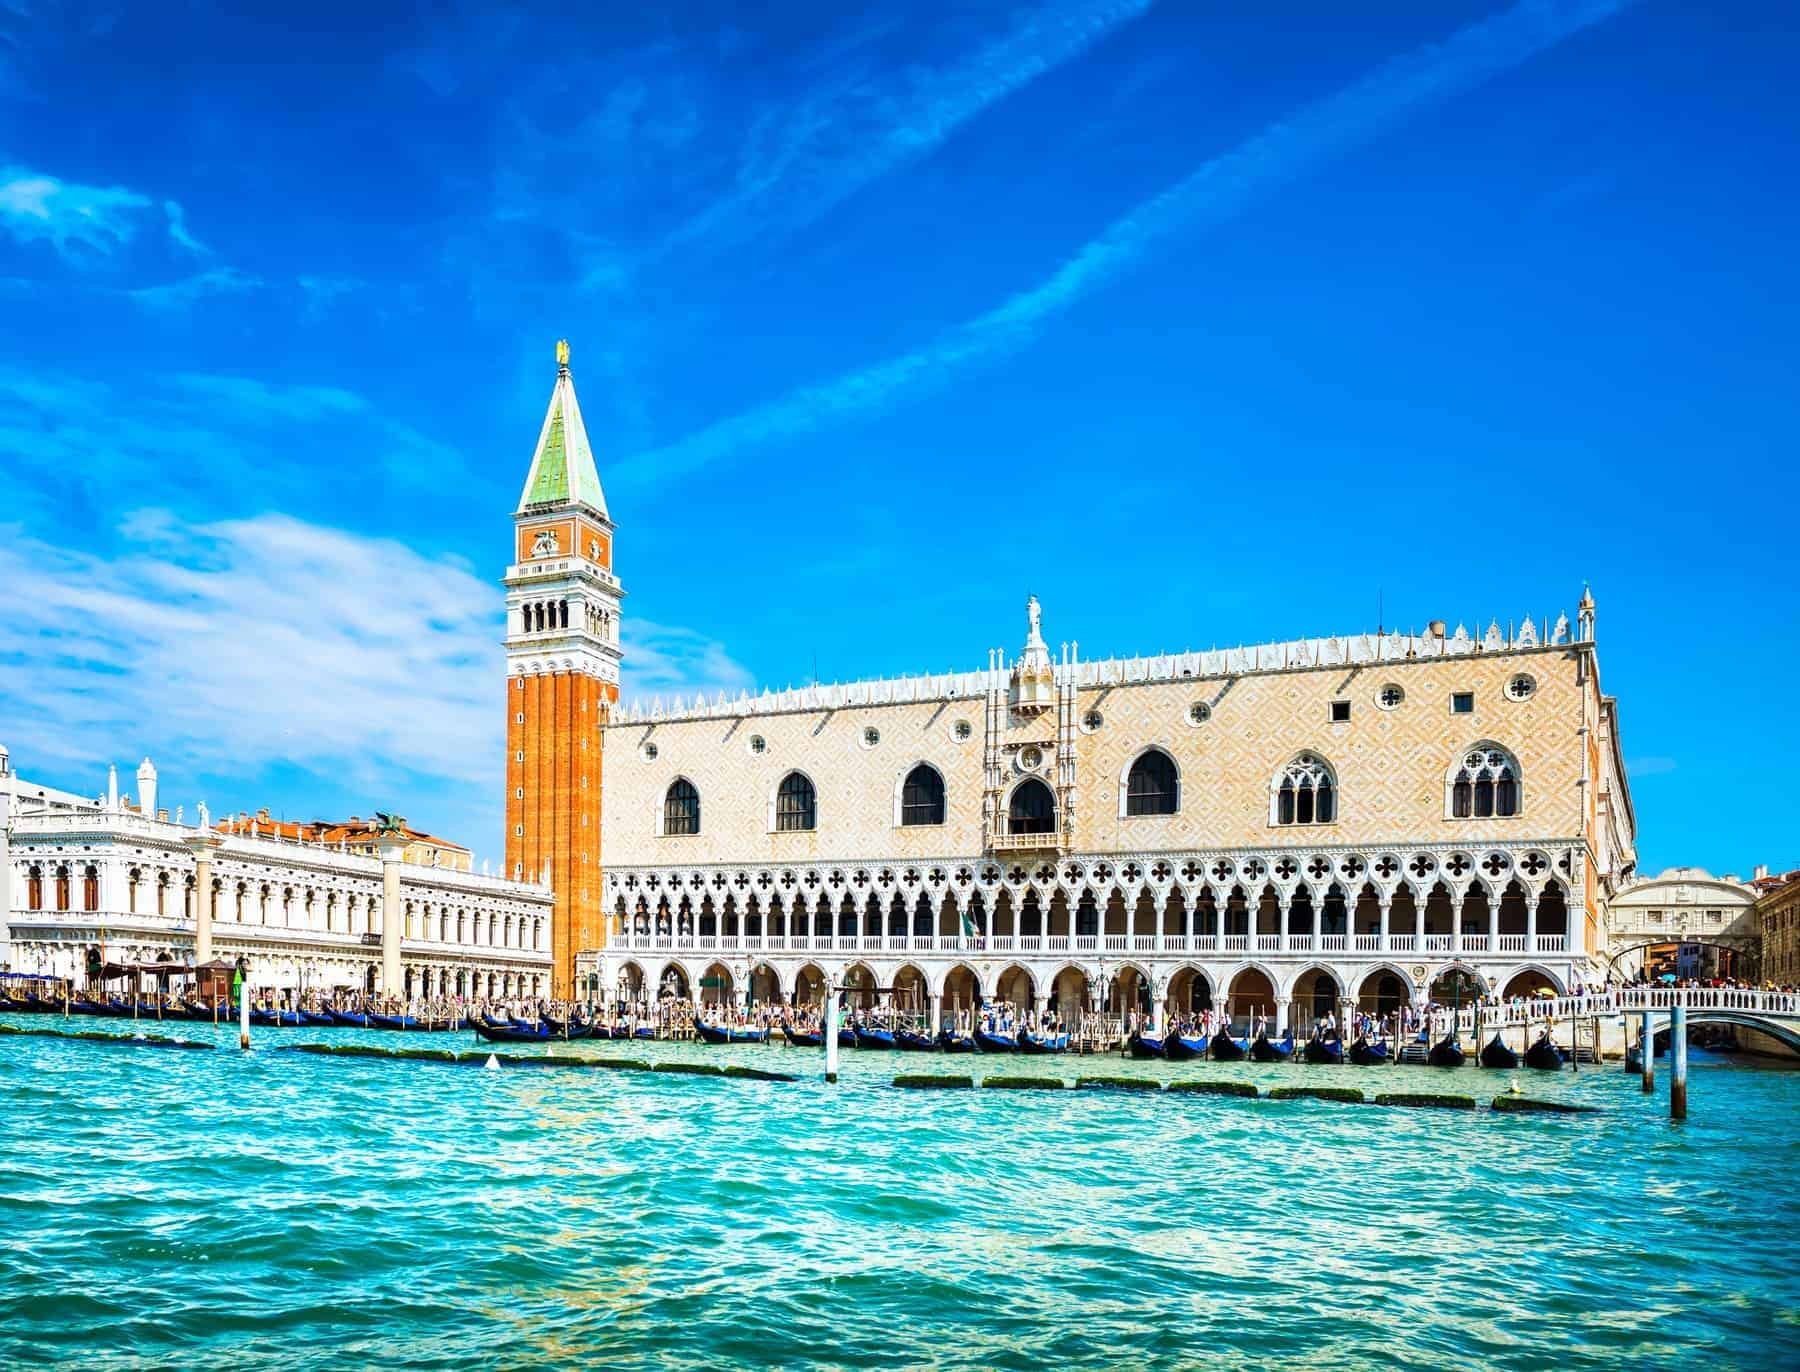 Venice landmark, view from sea of Piazza San Marco or st Mark square, Campanile and Ducale or Doge Palace. Italy, Europe.